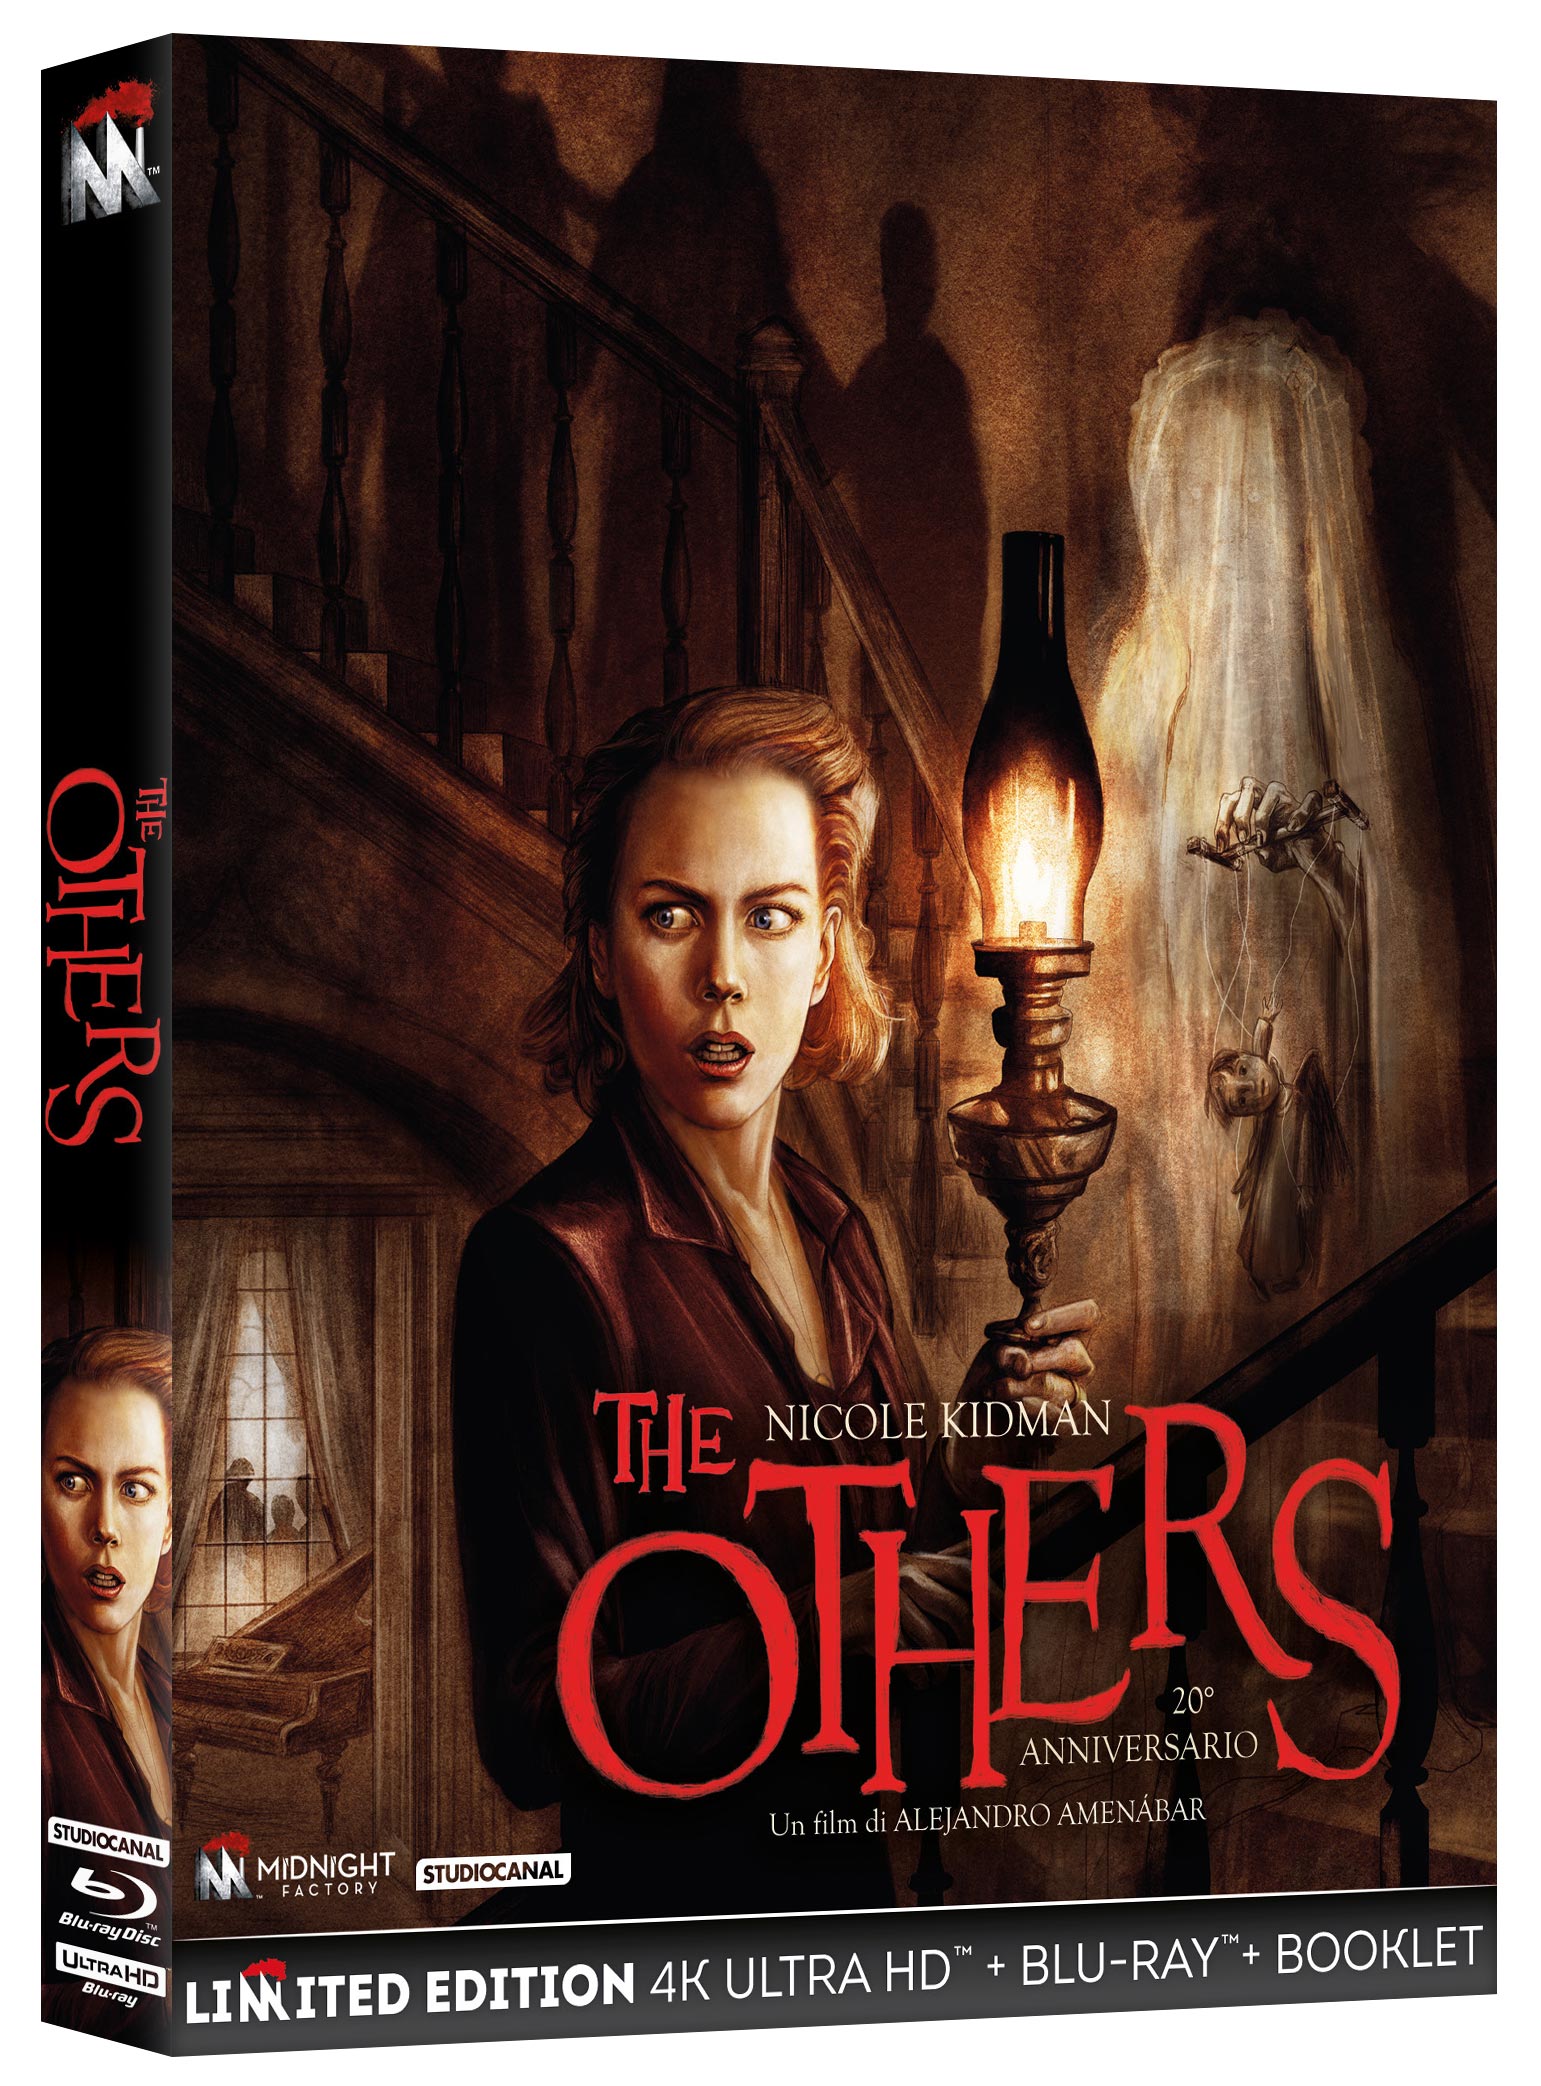 The Others in 4K UHD + Blu-ray